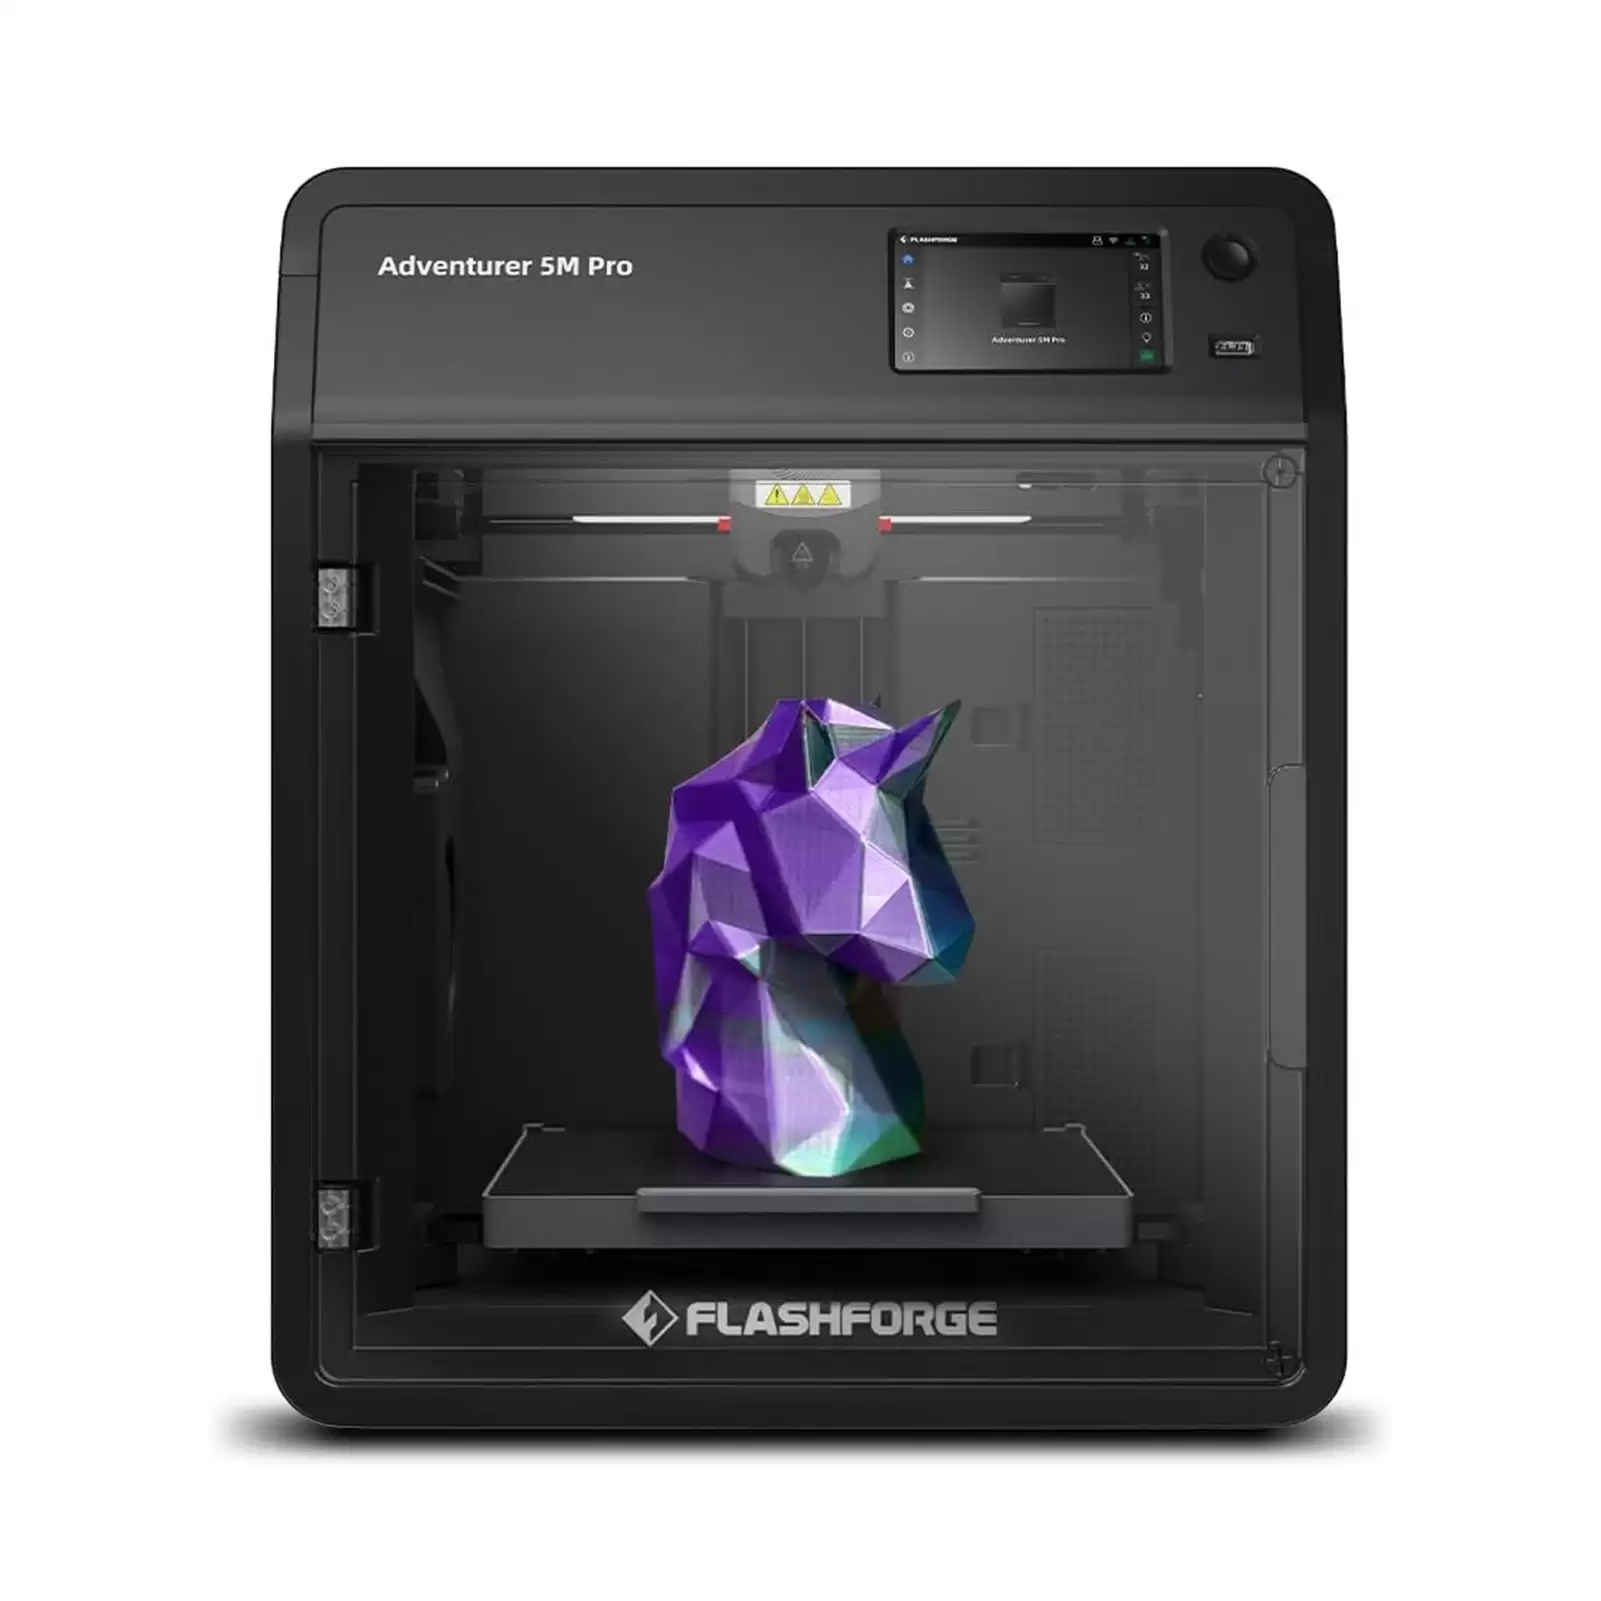 Order In Just $455 Flashforge Adventurer 5m Pro 3d Printer 600mm/S Max Sprinting Speed With This Discount Coupon At Tomtop